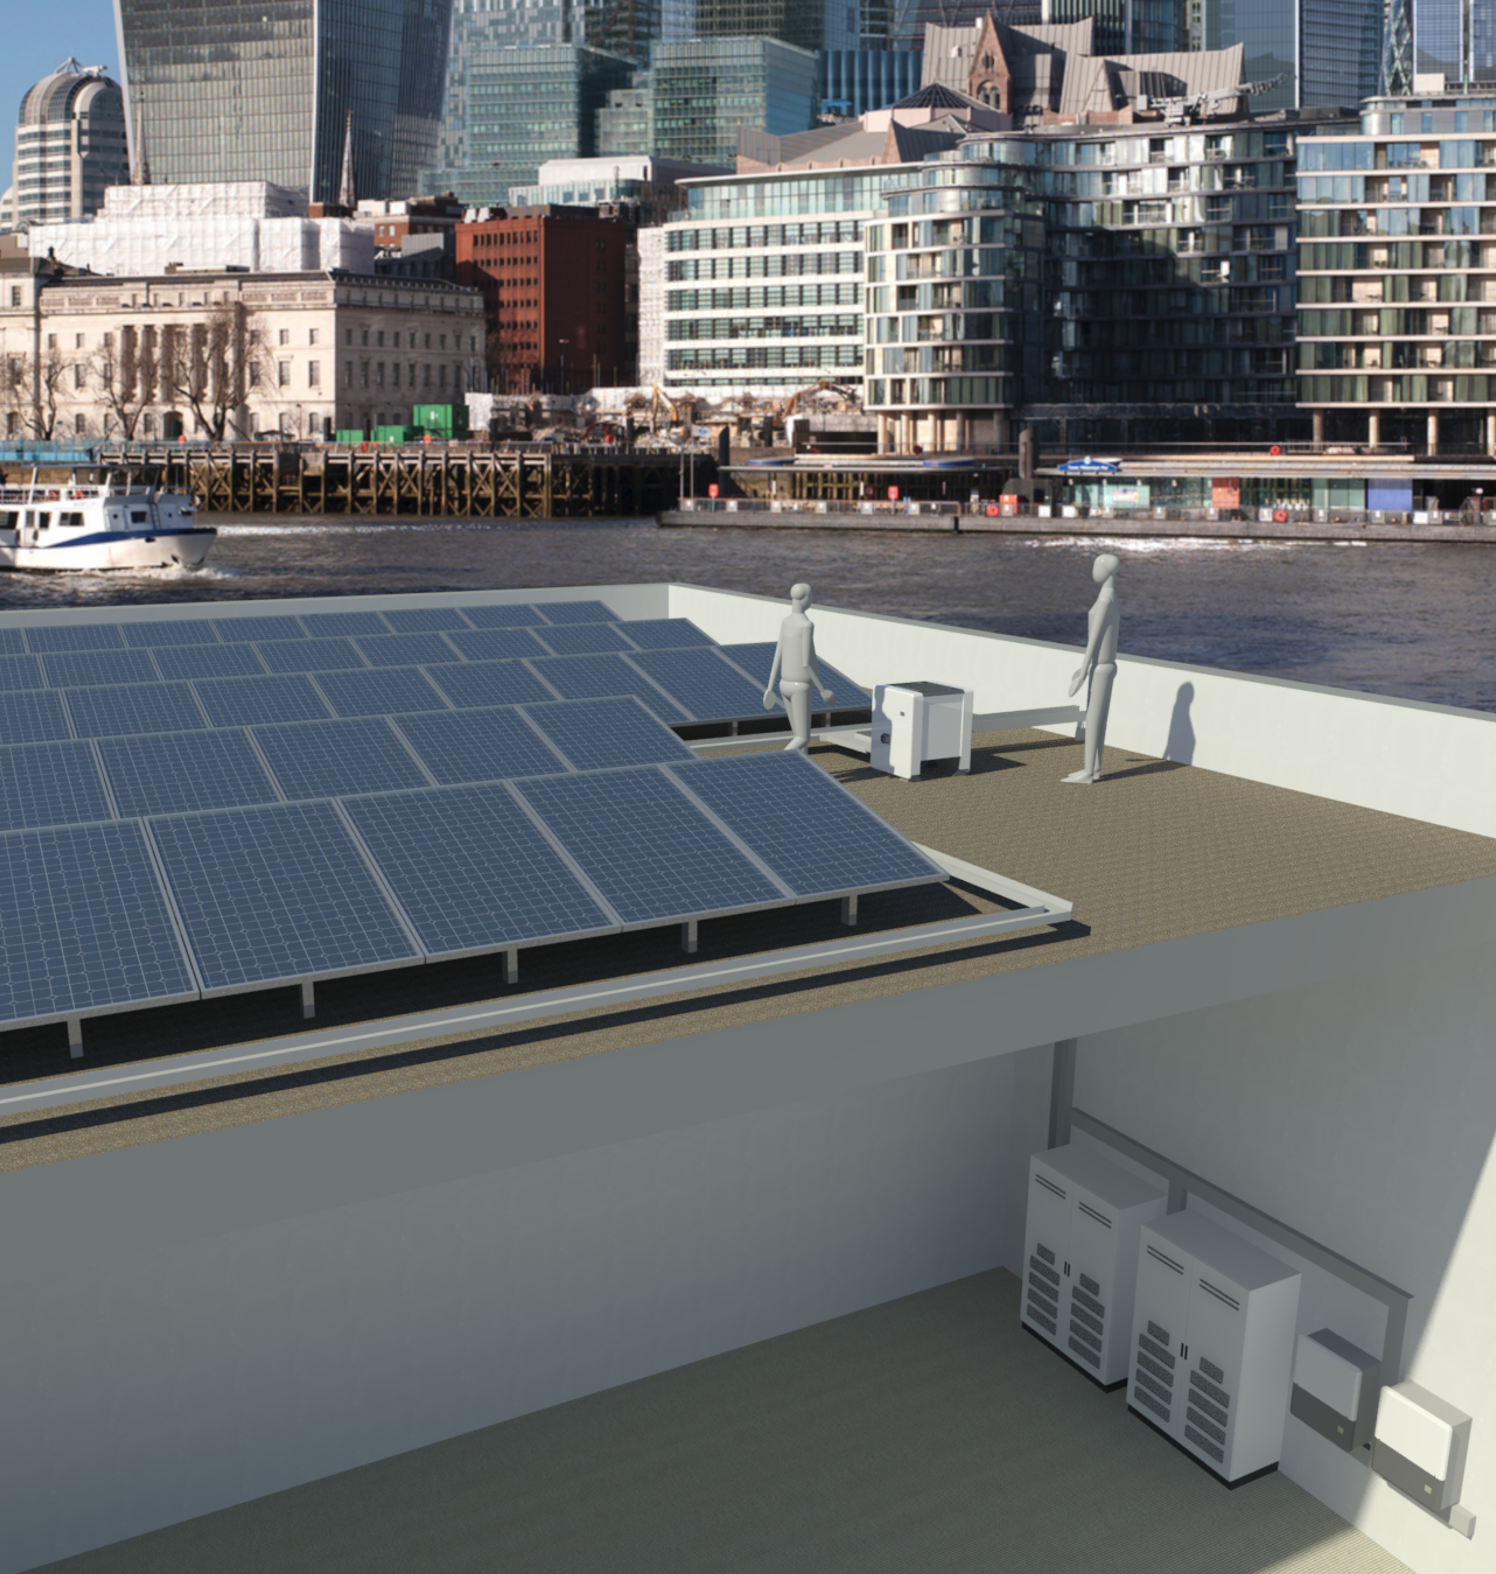 Revit render illustrating how the solar panel material works in context